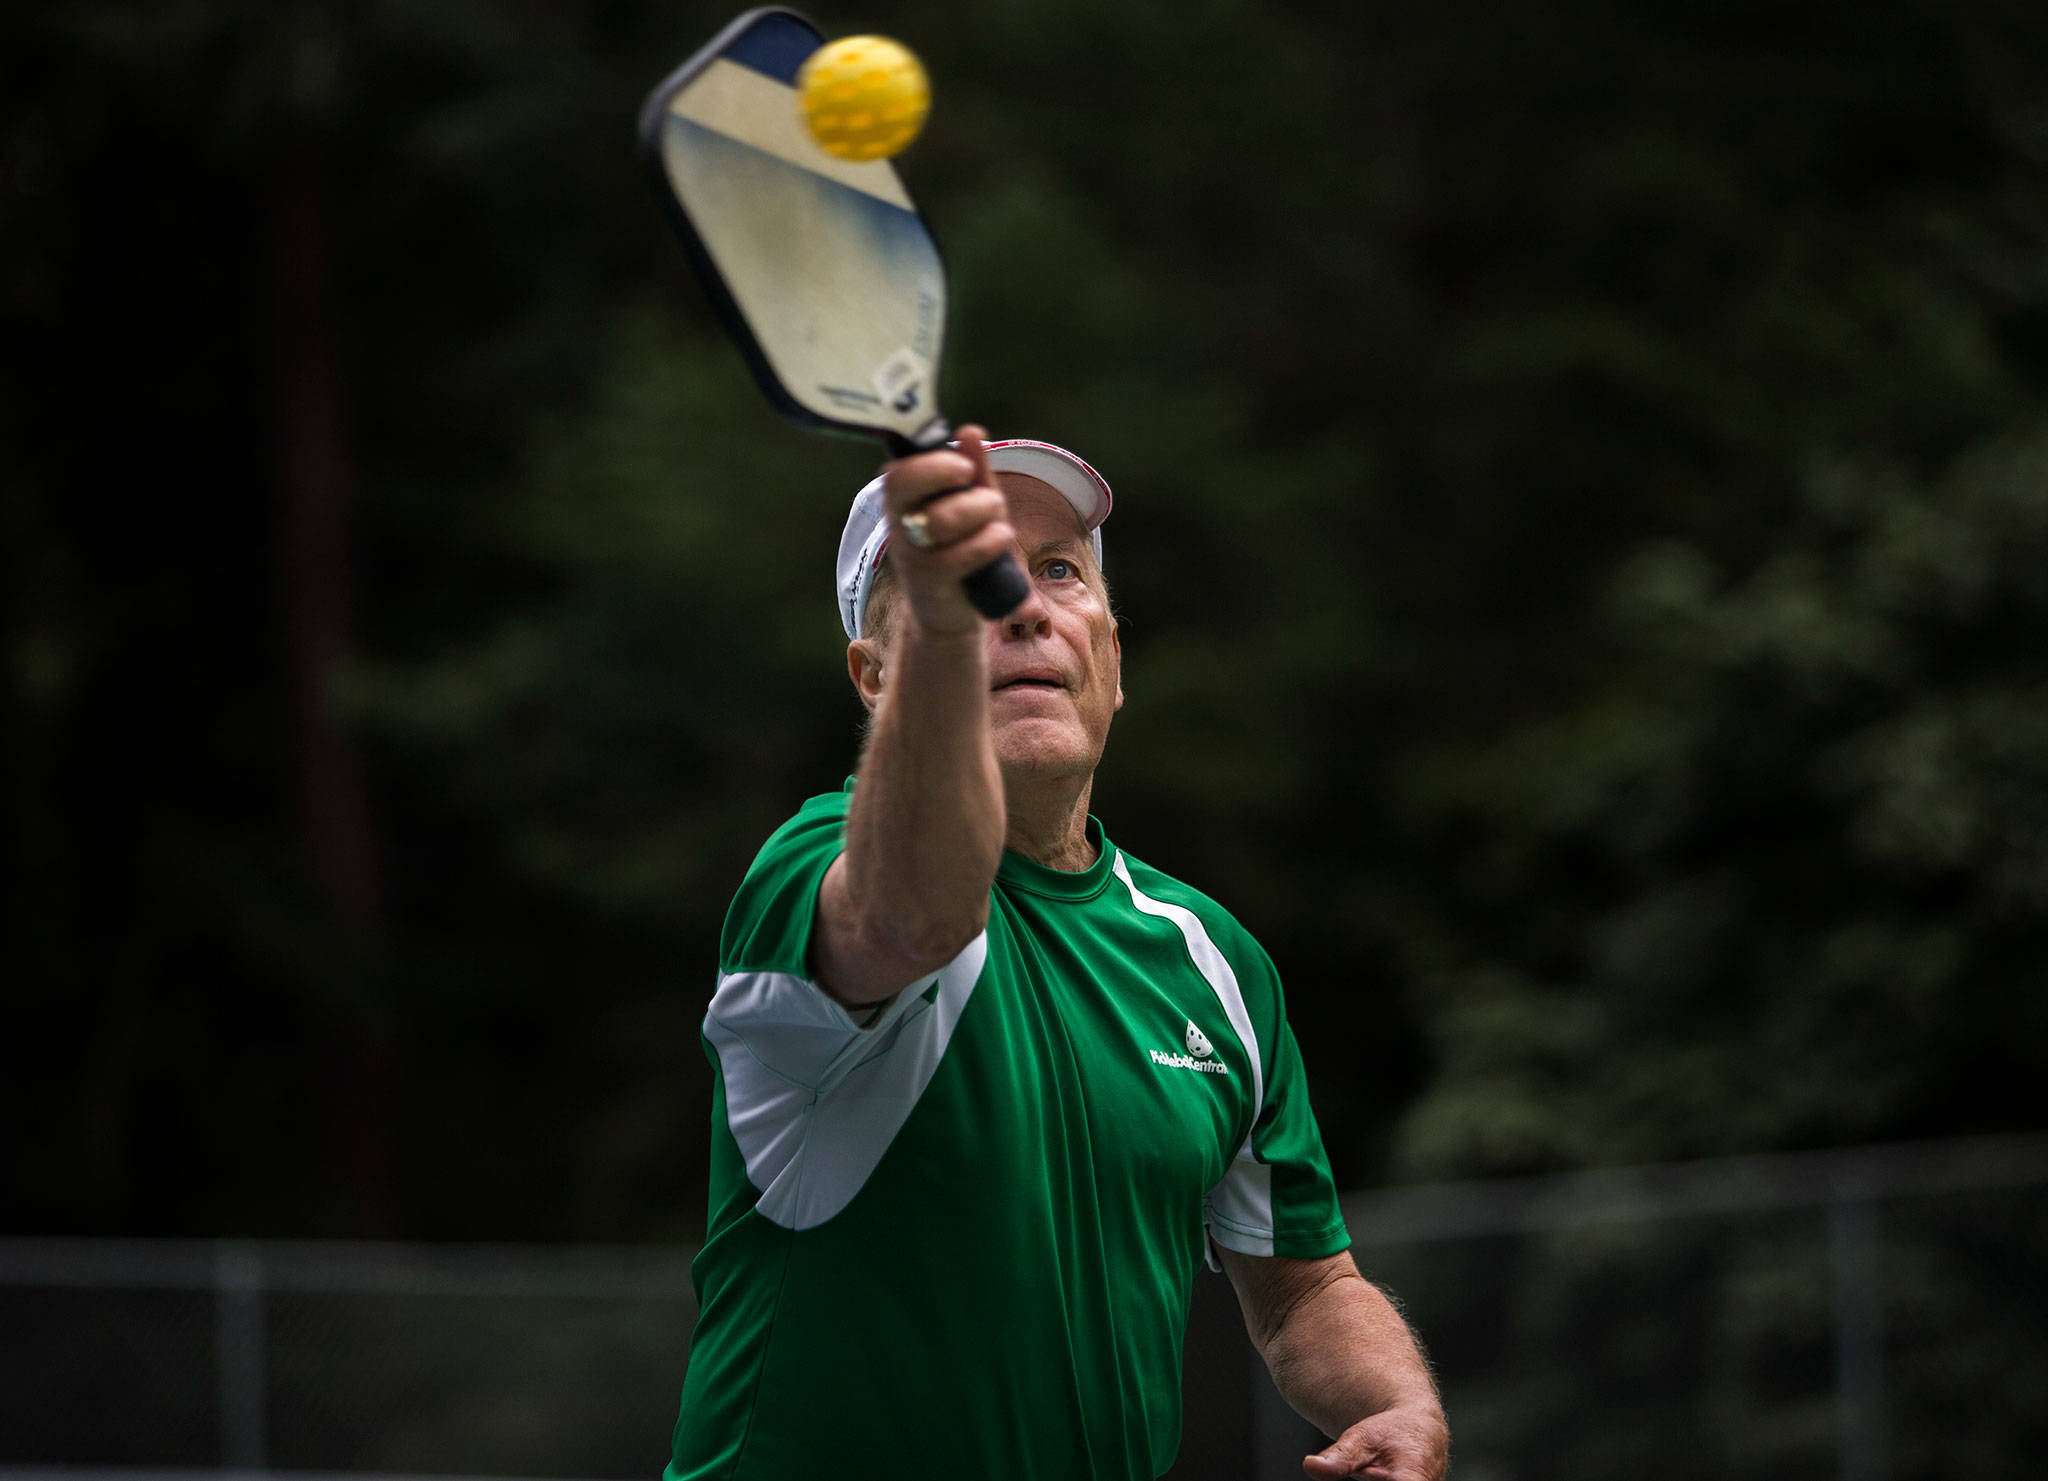 Roger BelAir hits the ball during a friendly game of pickleball at Yost Park in Edmonds. (Olivia Vanni / The Herald)